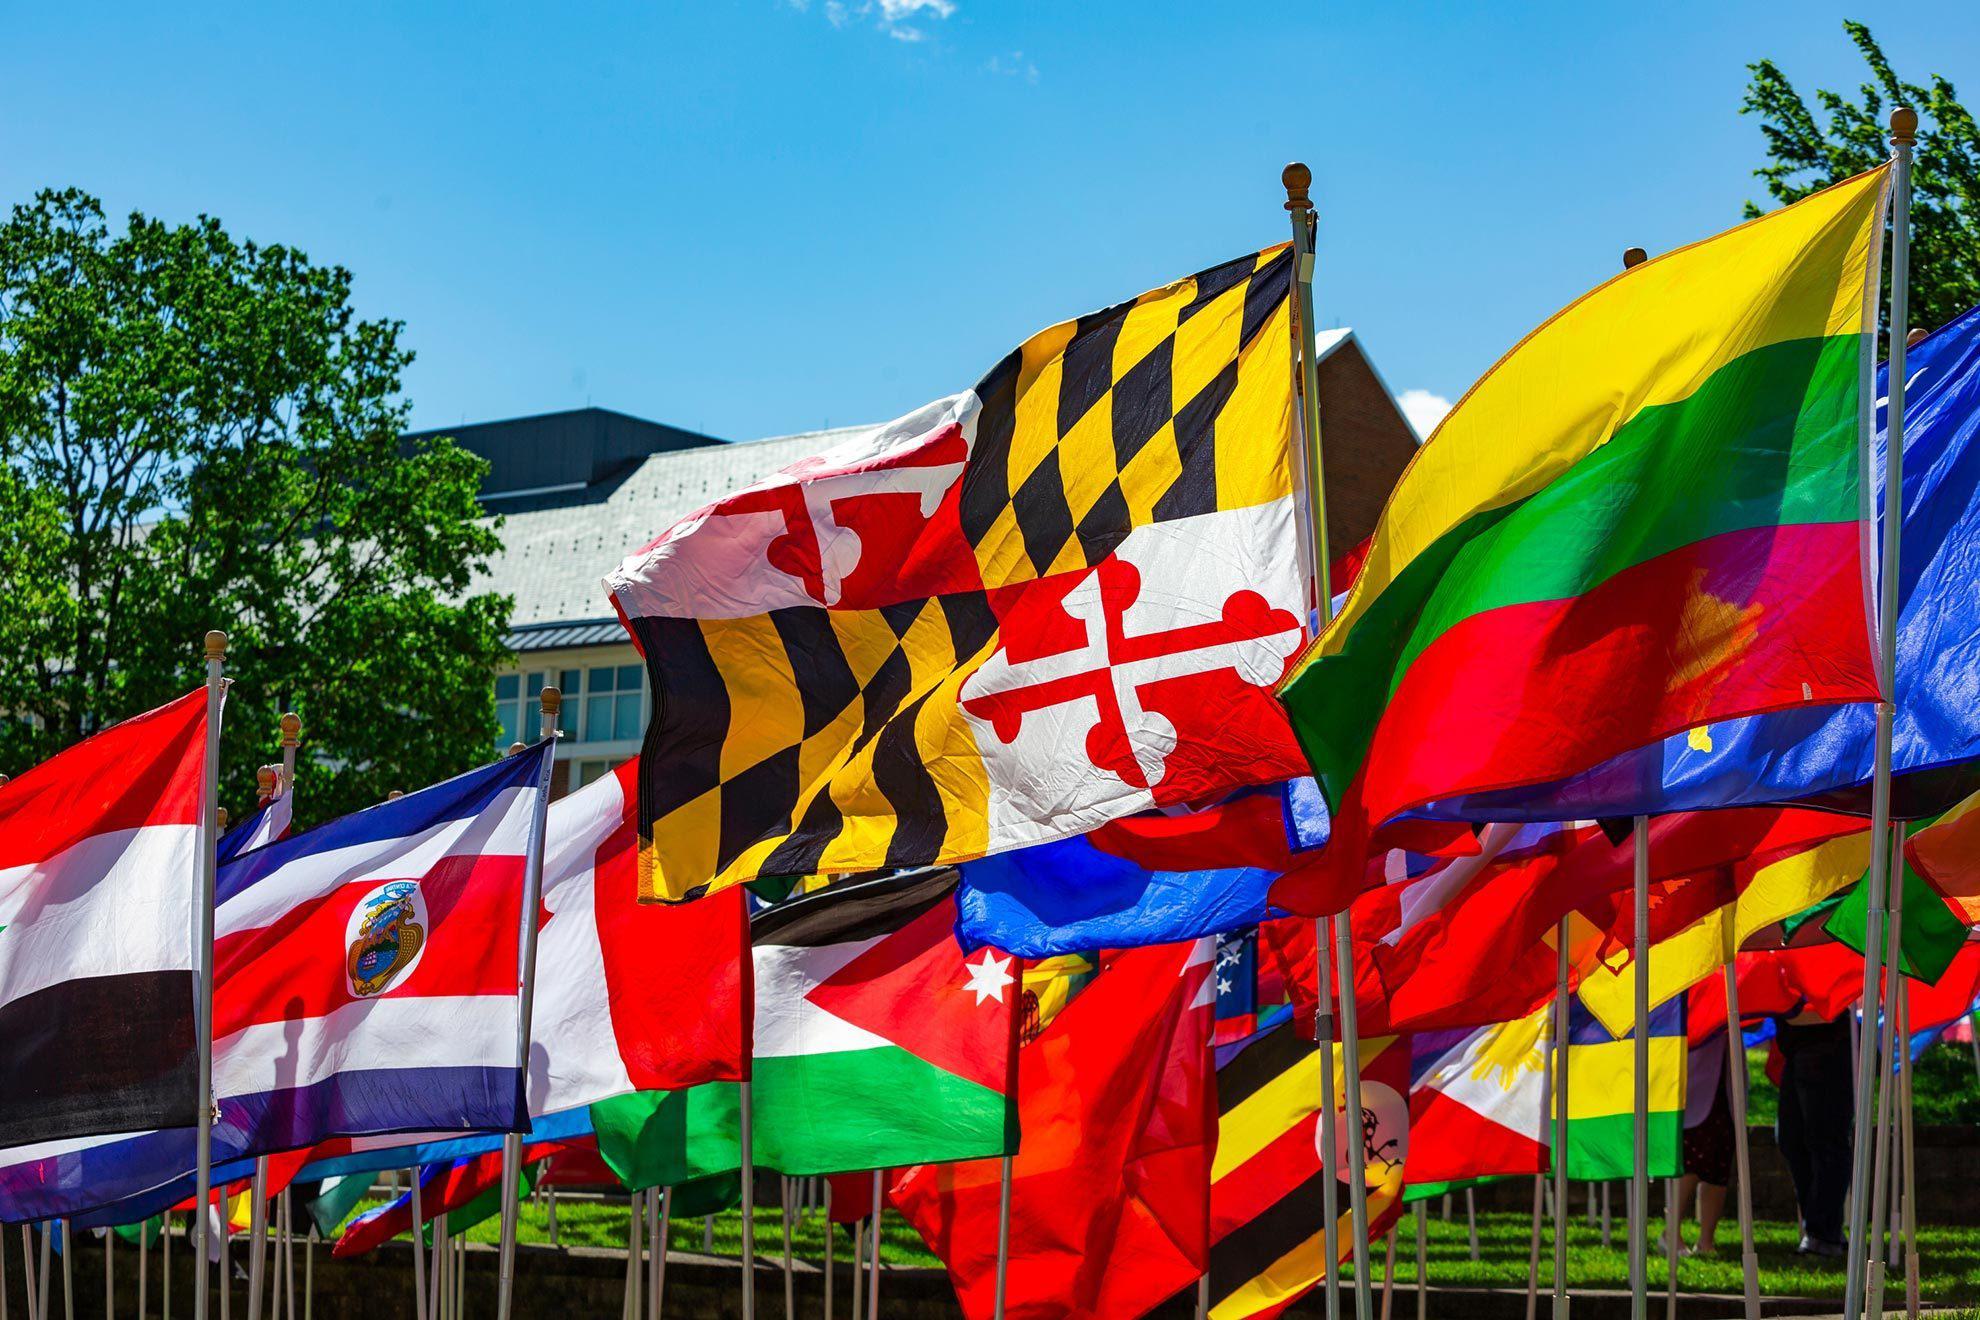 The Maryland flag standing among a collection of country flags in a strong wind presenting their diverse colors in front of a bright blue sky